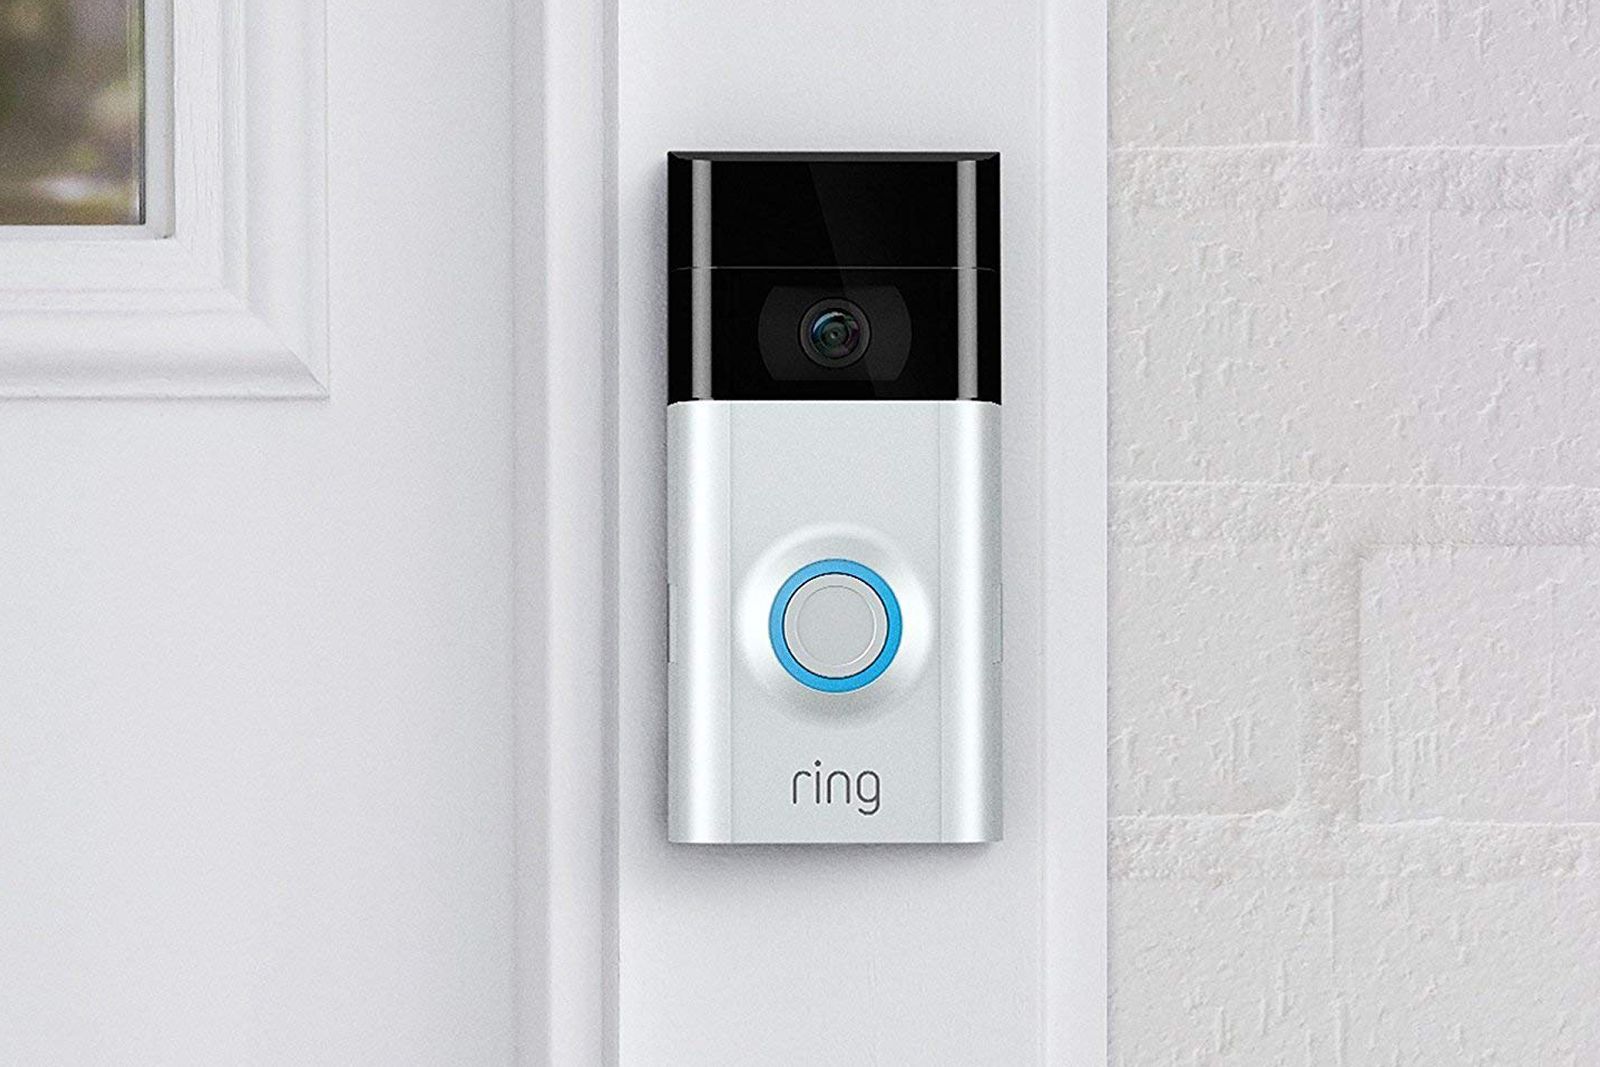 Ring is going to change its privacy settings after recent criticism image 1